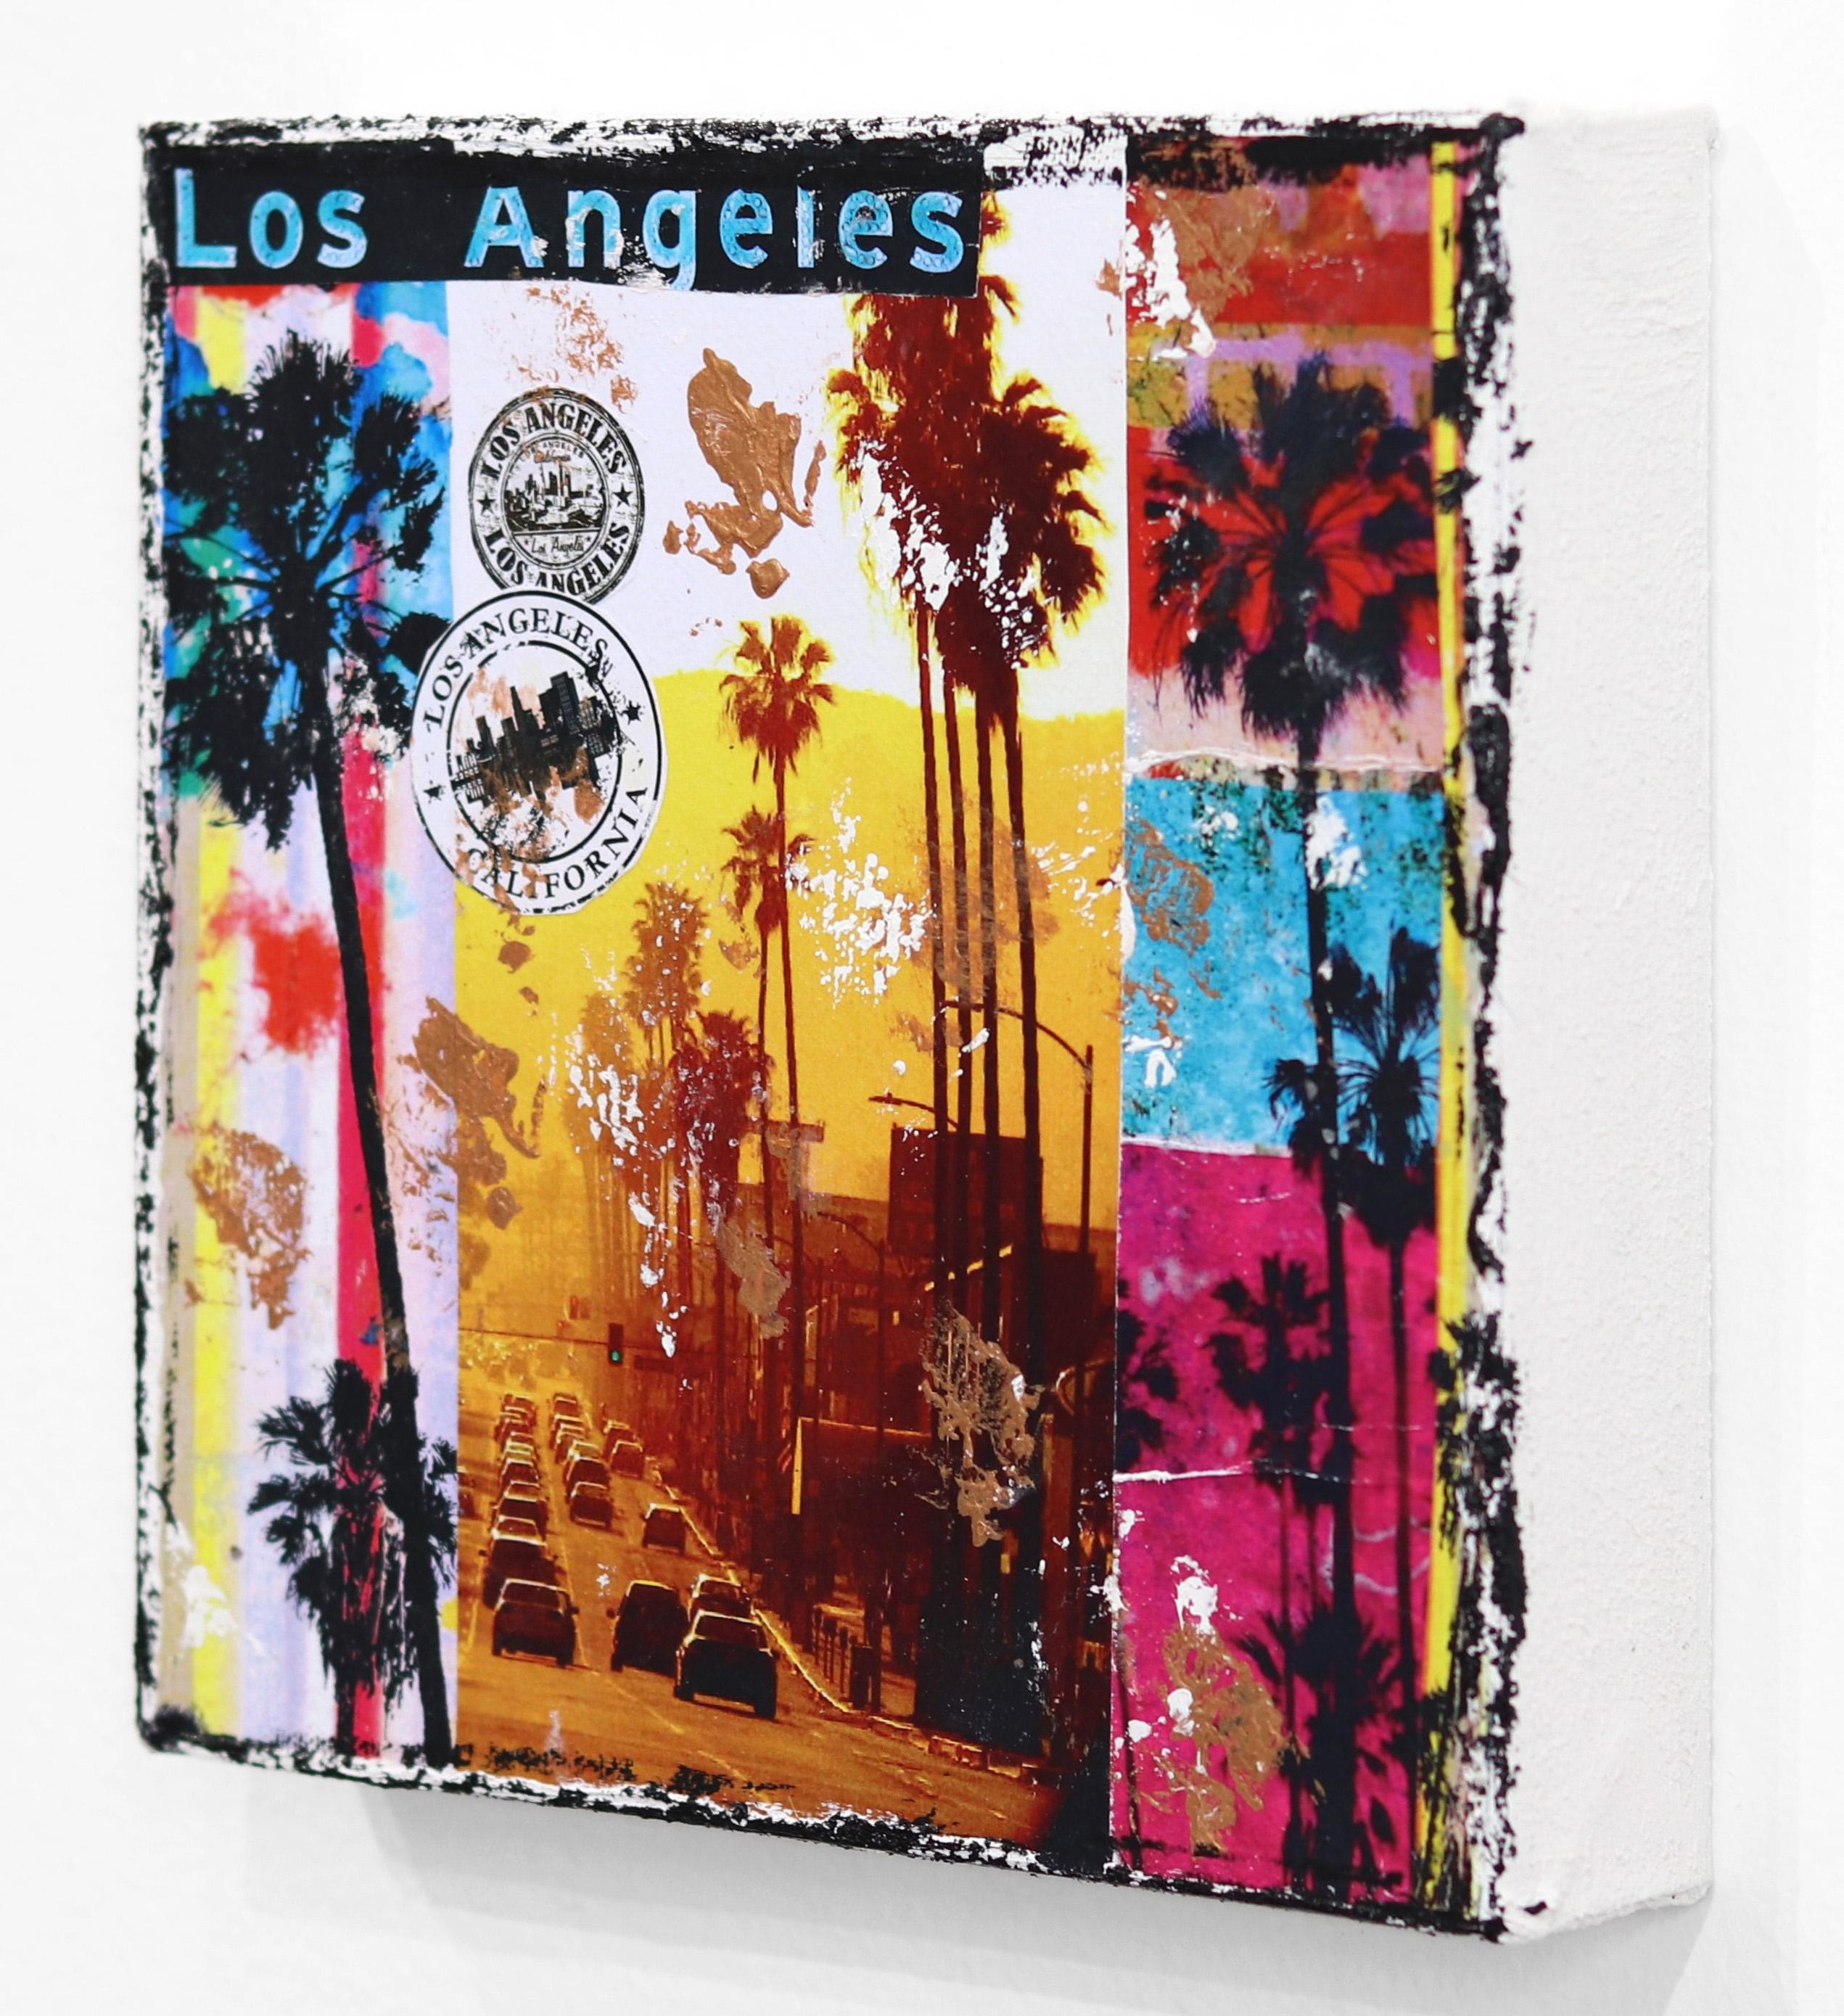 Los Angeles, CA - Original California Inspired Pop Art on Canvas - Beige Landscape Painting by Marion Duschletta